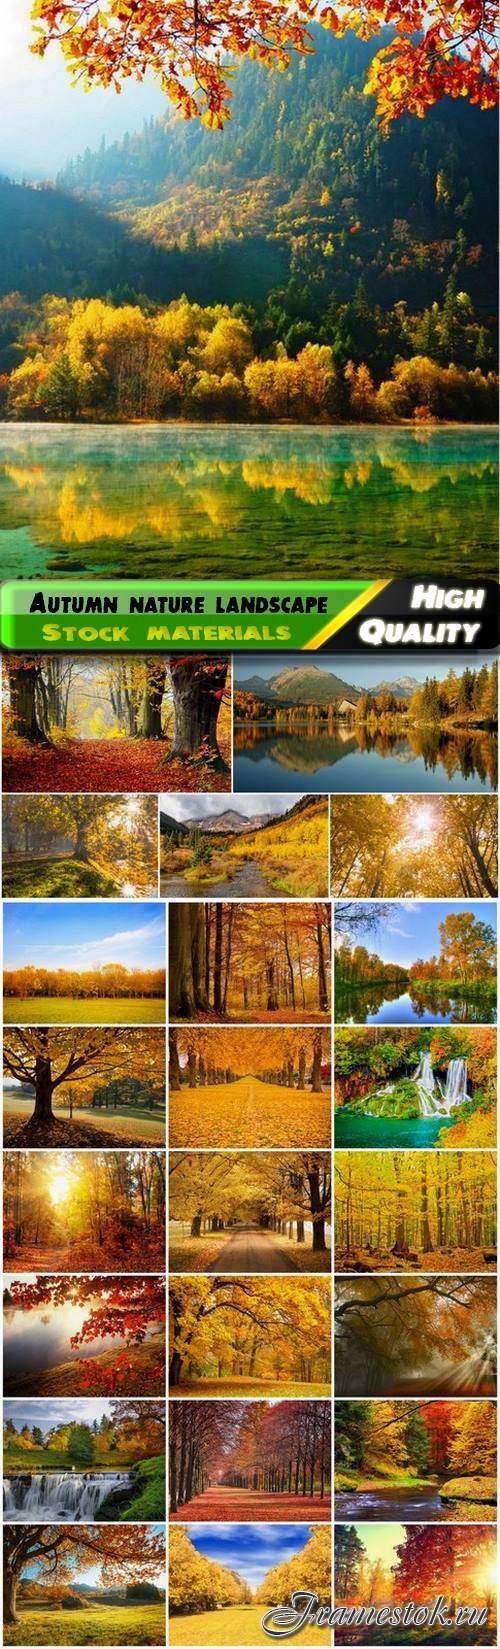 Autumn nature landscape with tree and yellowed leaves - 25 HQ Jpg